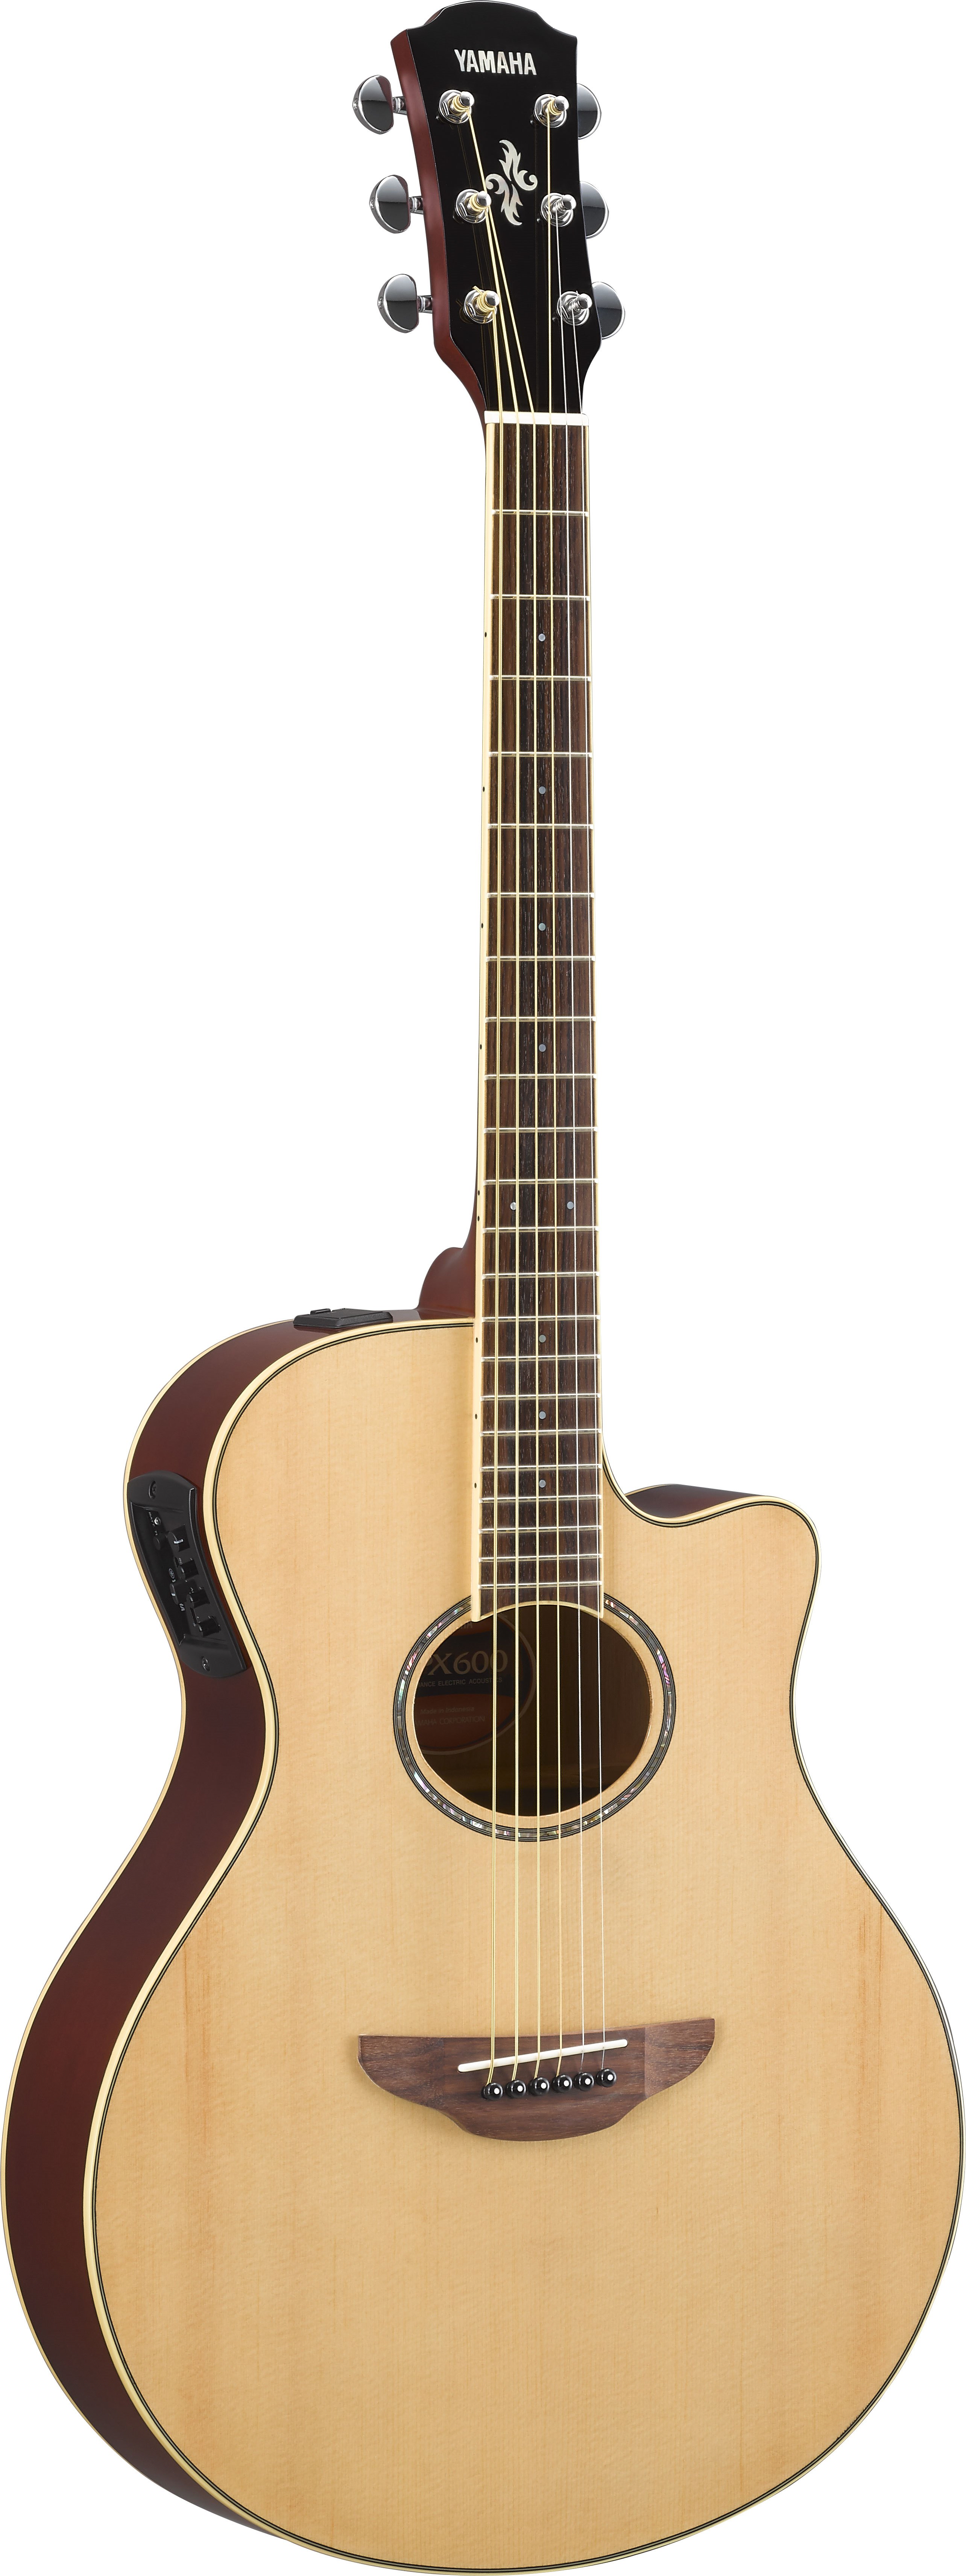 APX - Overview - Acoustic Guitars - Guitars, Basses & Amps - Musical  Instruments - Products - Yamaha - UK and Ireland